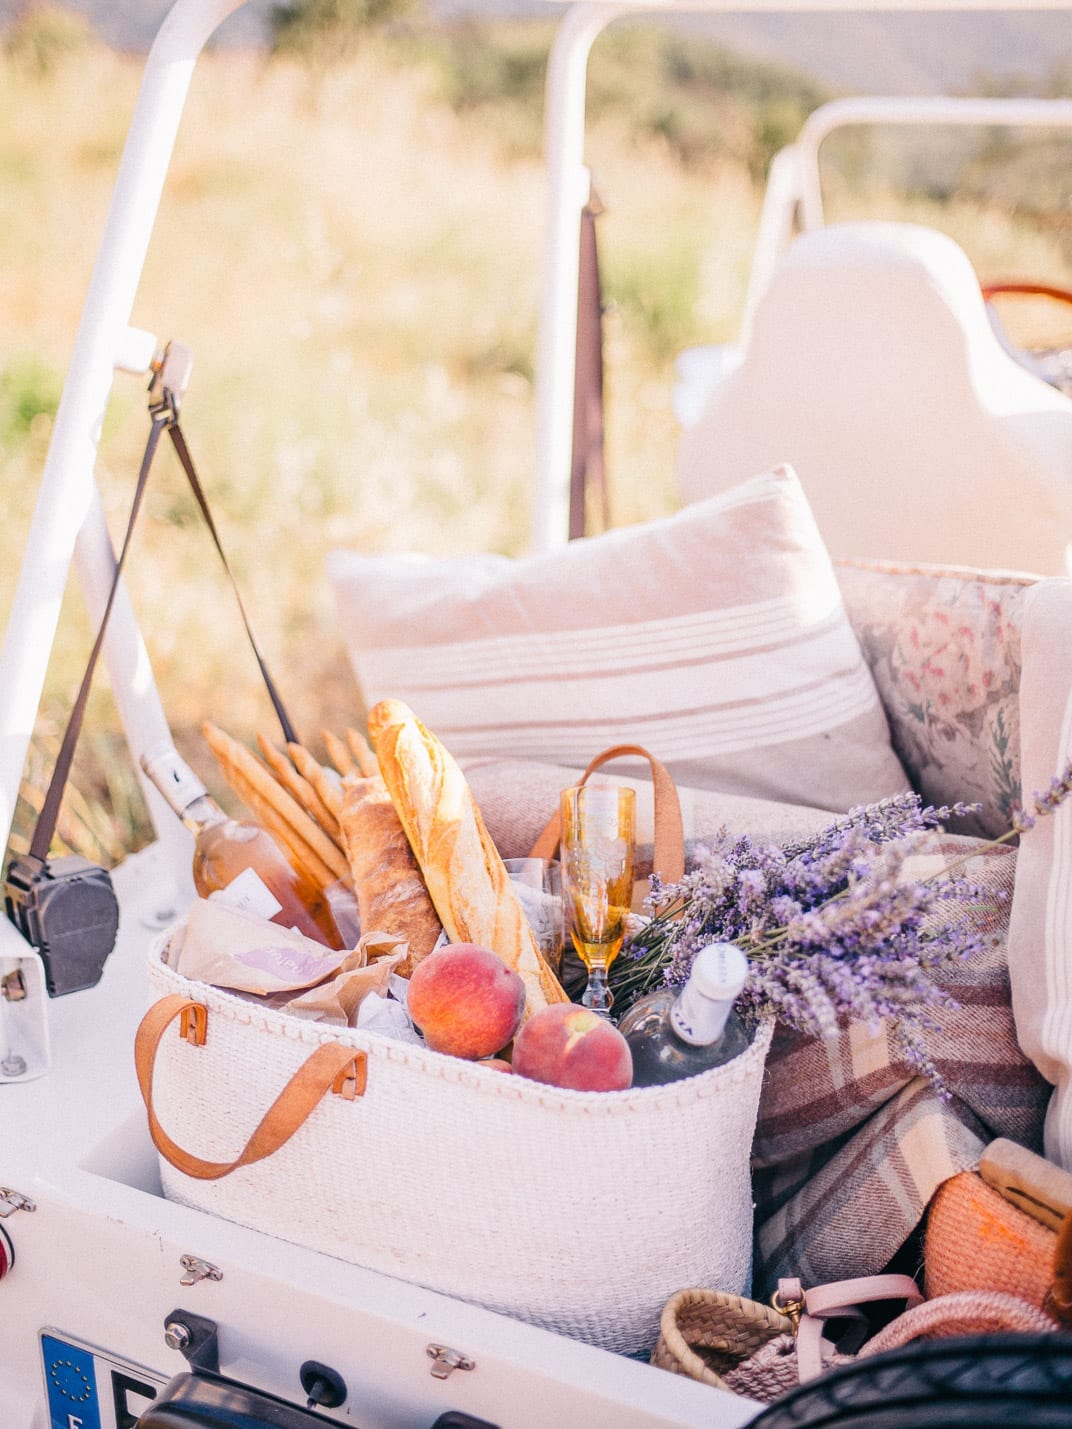 The Most Romantic Things - French Picnic - Wine, Cheese & Fruits